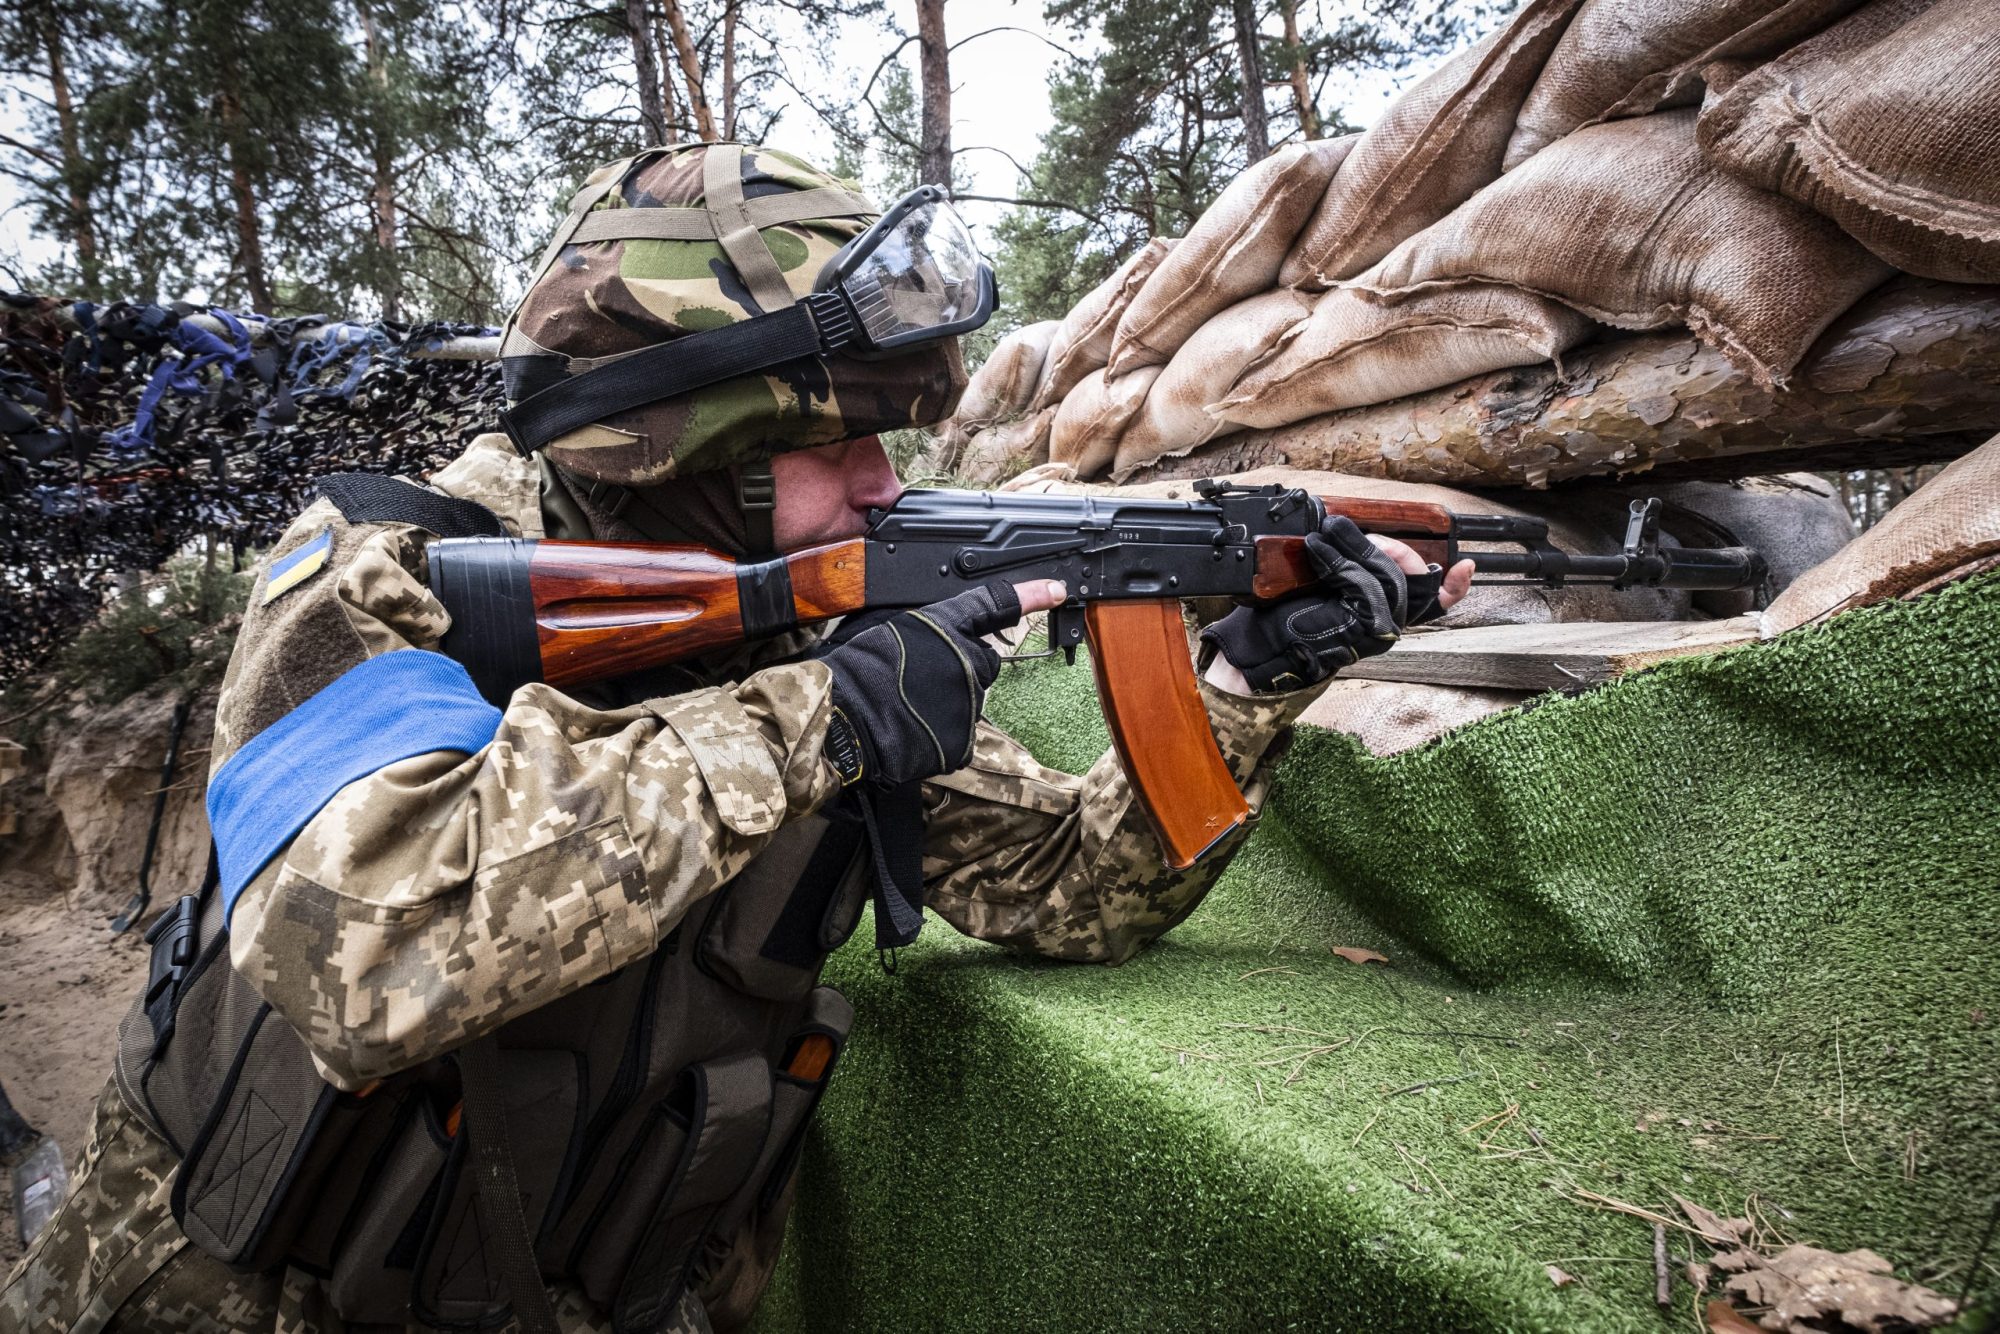 Ukrainian snipers are about to get this powerful new upgrade